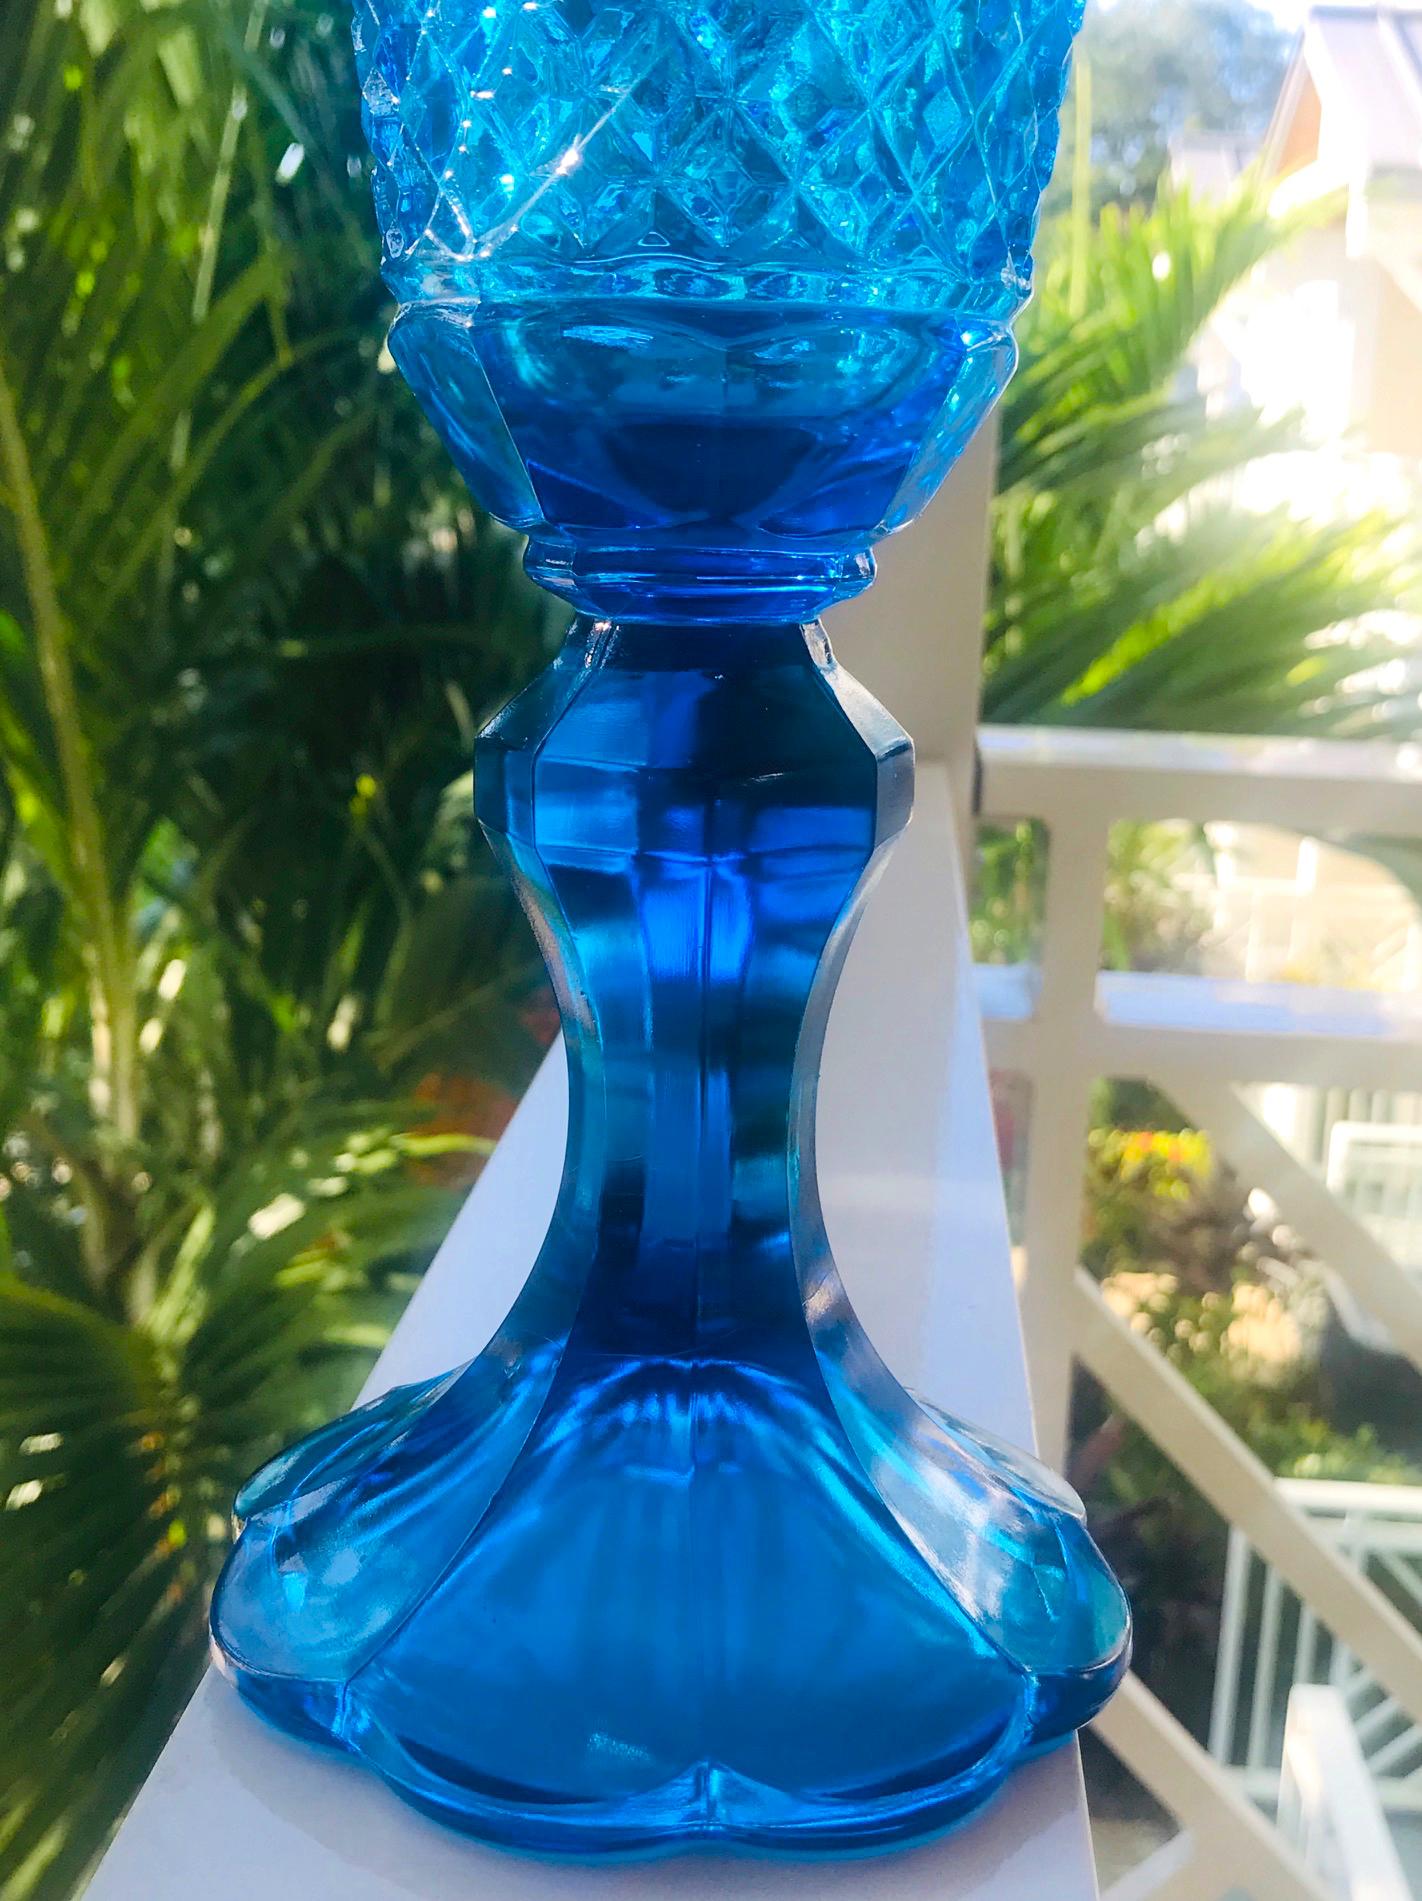 American Hollywood Regency Footed Glass Urn with Lid in Vibrant Aqua, 1940s